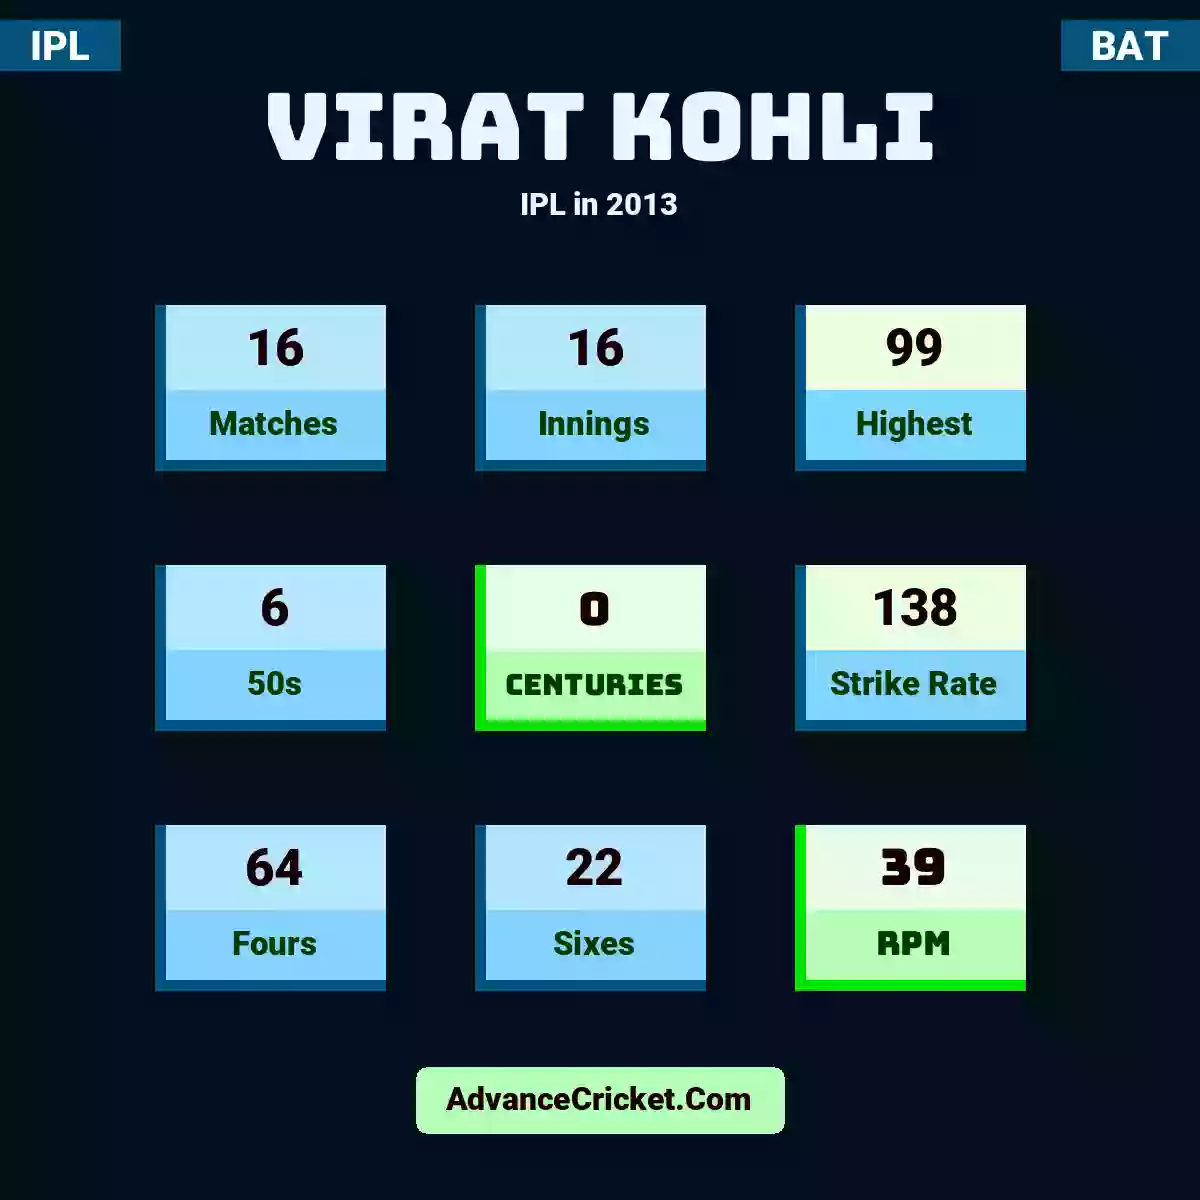 Virat Kohli IPL  in 2013, Virat Kohli played 16 matches, scored 99 runs as highest, 6 half-centuries, and 0 centuries, with a strike rate of 138. V.Kohli hit 64 fours and 22 sixes, with an RPM of 39.